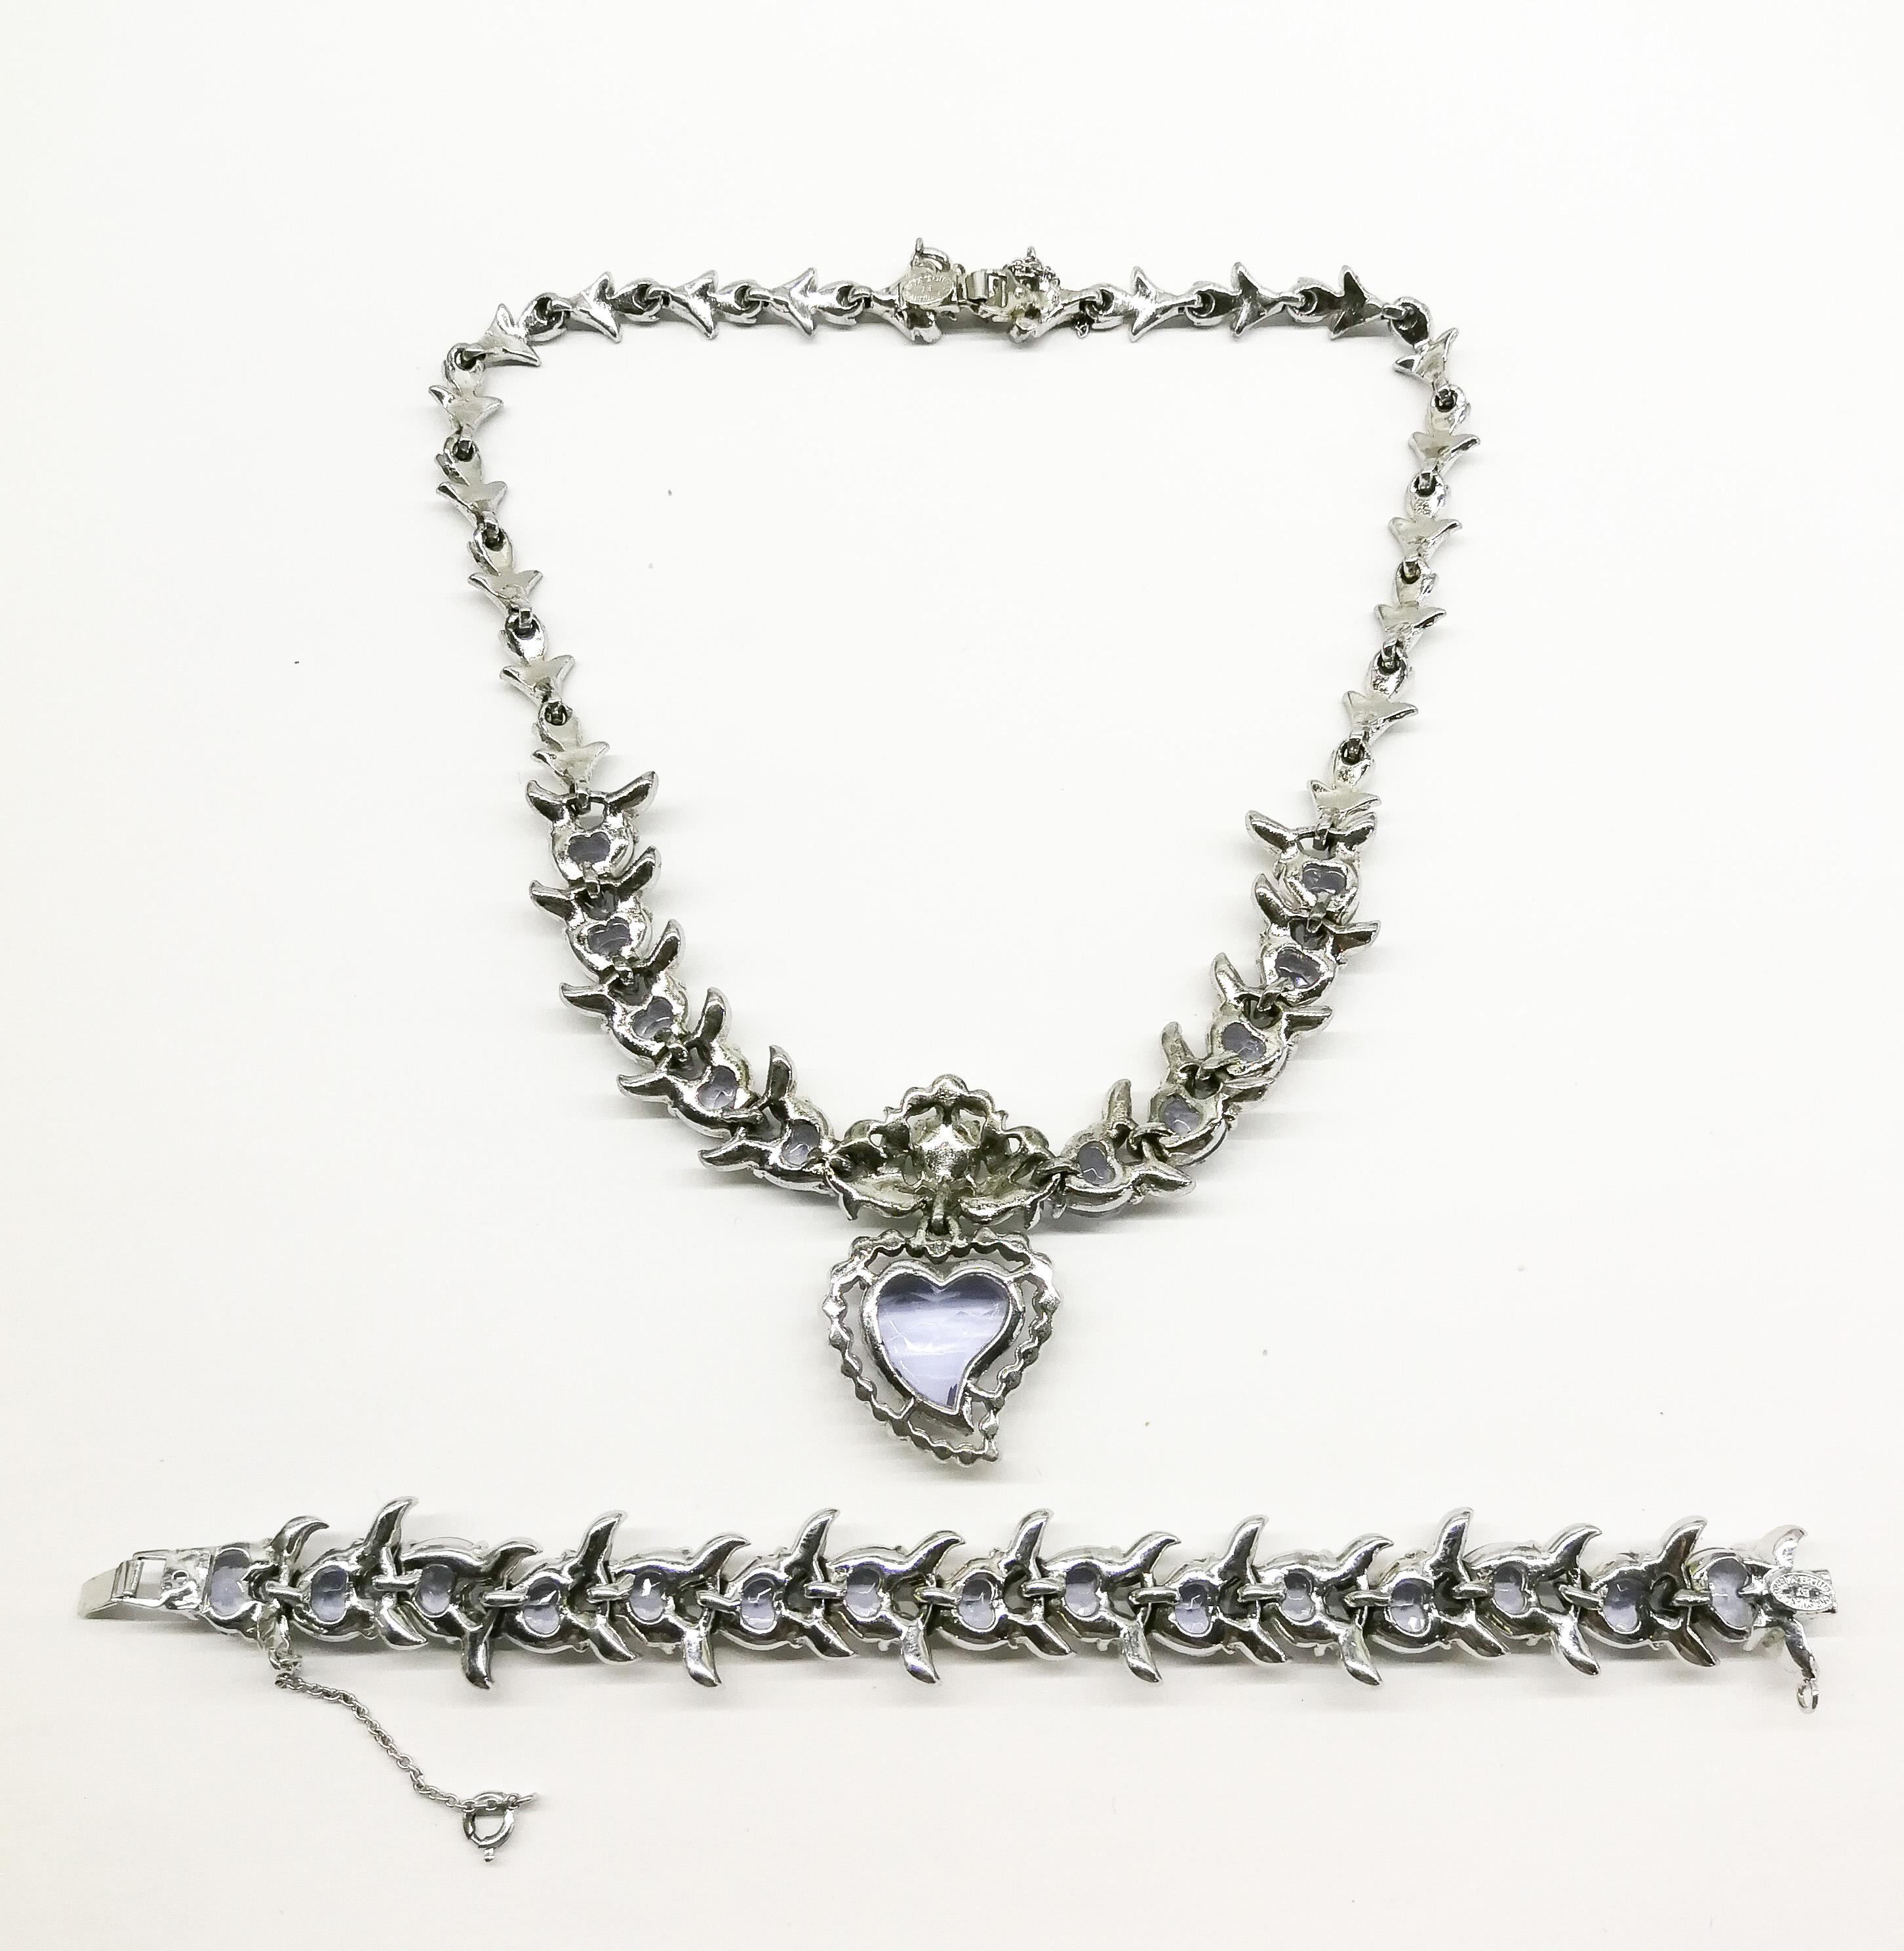 Women's  A 'Witch's Heart' necklace and bracelet, Christian Dior by Mitchel Maer, 1950s.